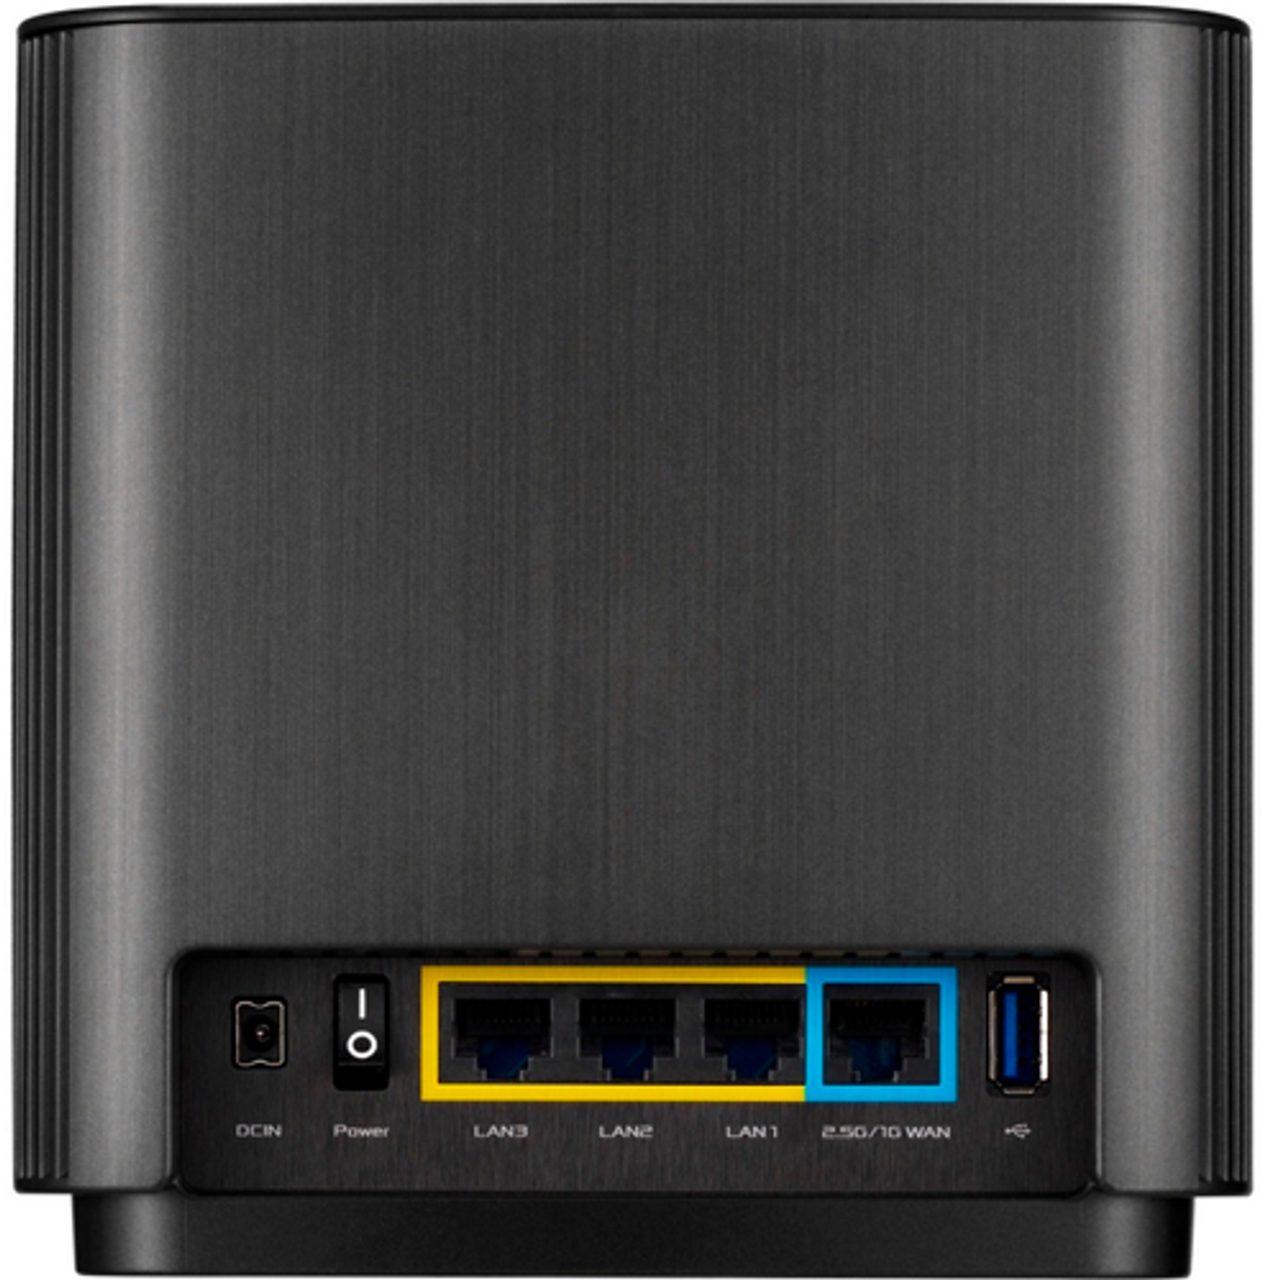 ASUS - ZenWiFi AX Wireless-AC 825 MB/s Router with Ethernet Modem - Black